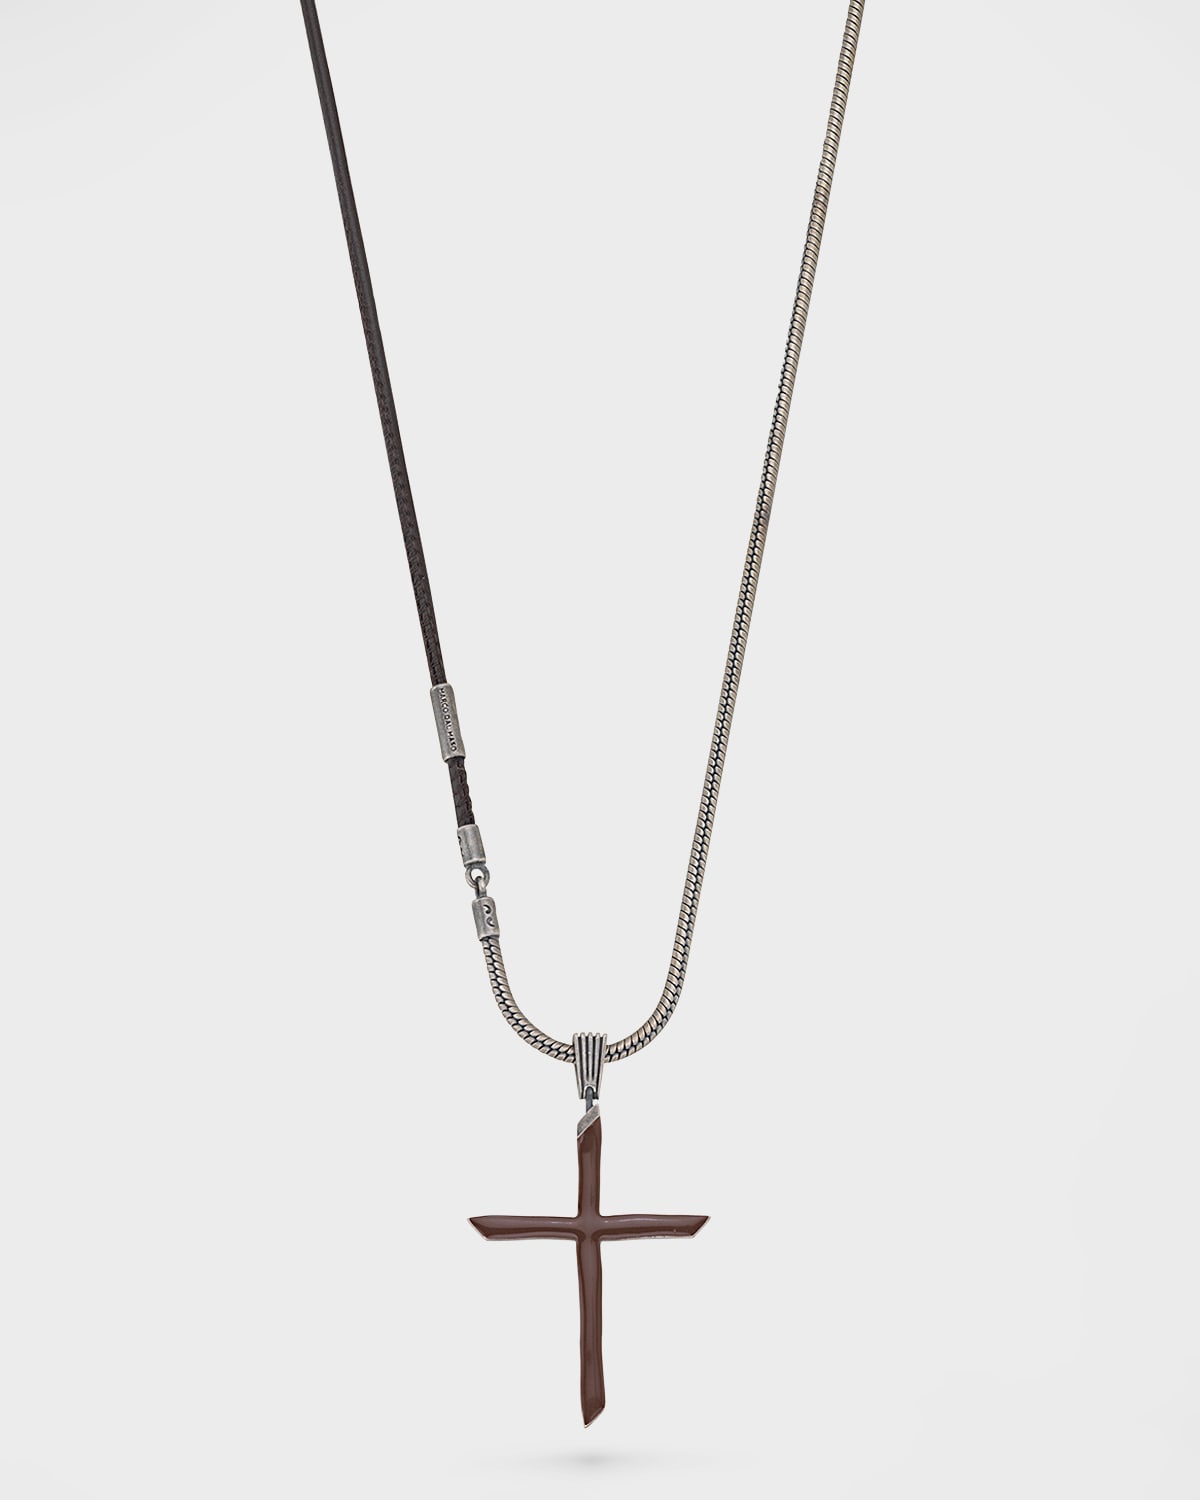 Marco Dal Maso The Cross Pendant Necklace In Oxidized Silver, Brown Enamel And Brown Leather